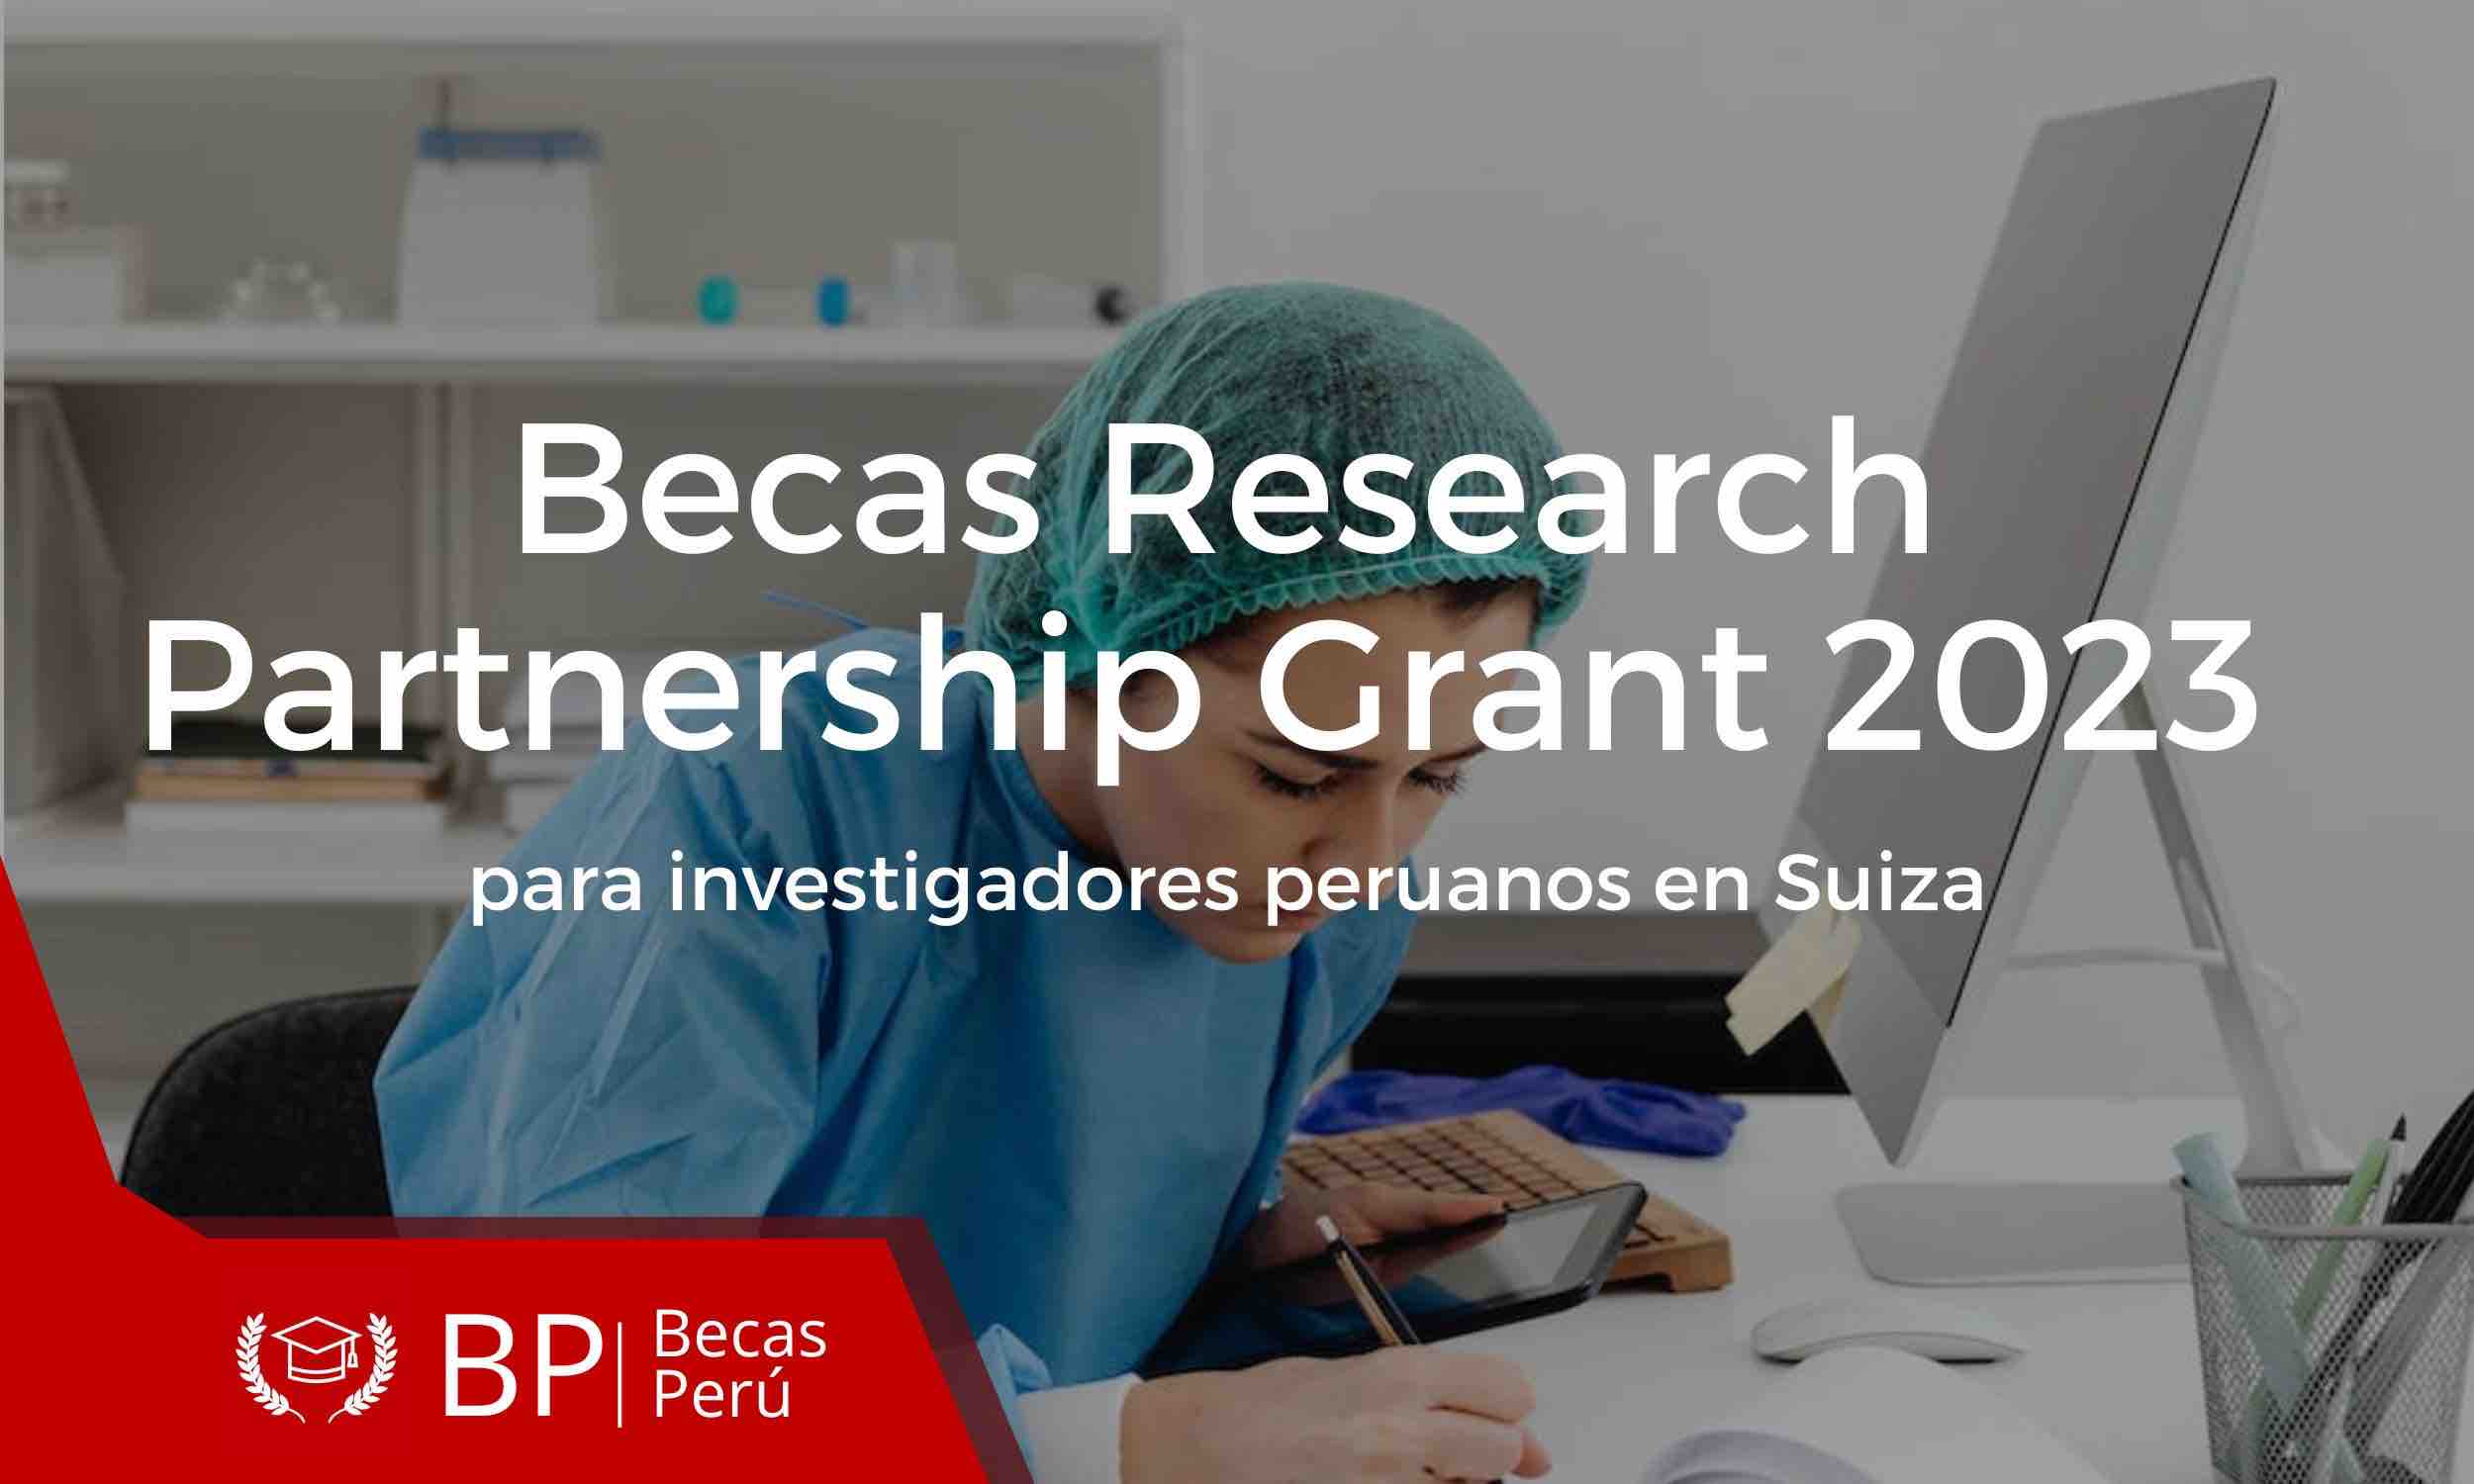 Becas Research Partnership Grant 2023